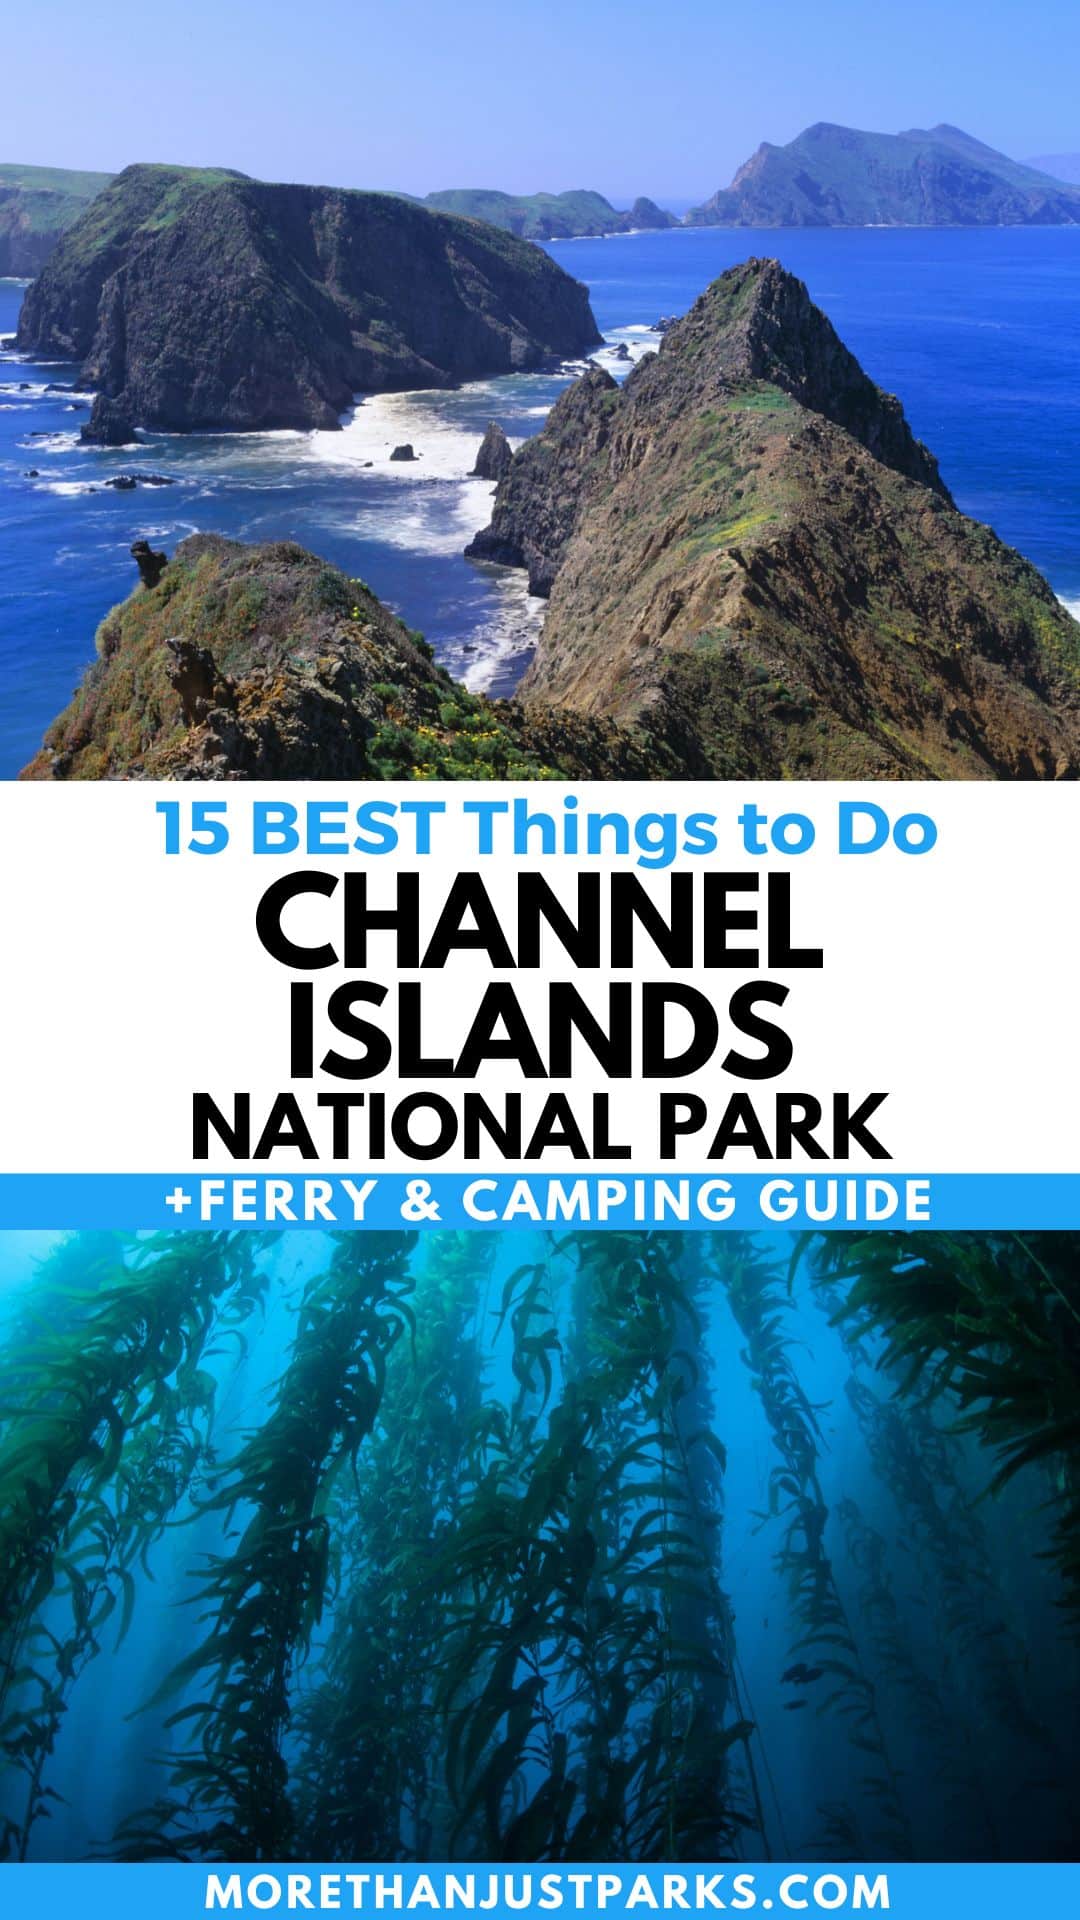 Graphic Reads "15 Best Things to do Channel Islands National park Ferry & Camping Help"